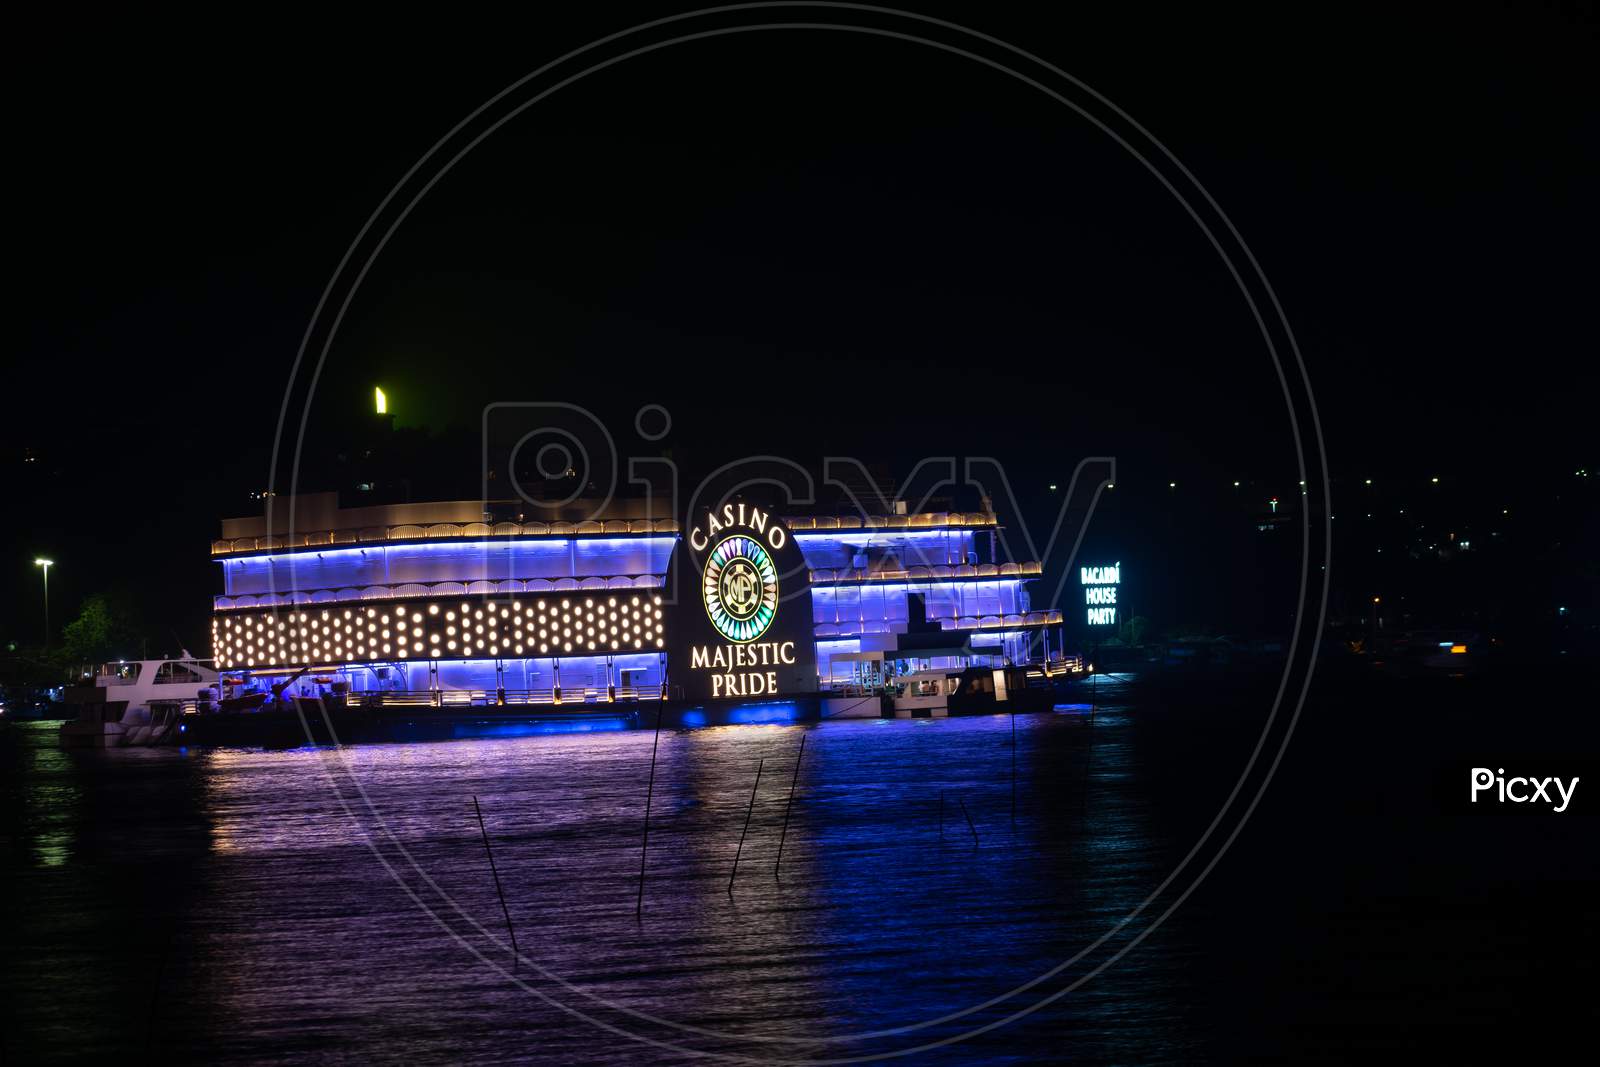 Panjim, Goa, India - 01 October 2021, Picture of Casino Majestic Pride cruise ship situated in Mandovi river which is tourist attraction for gambling, betting and entertainment.